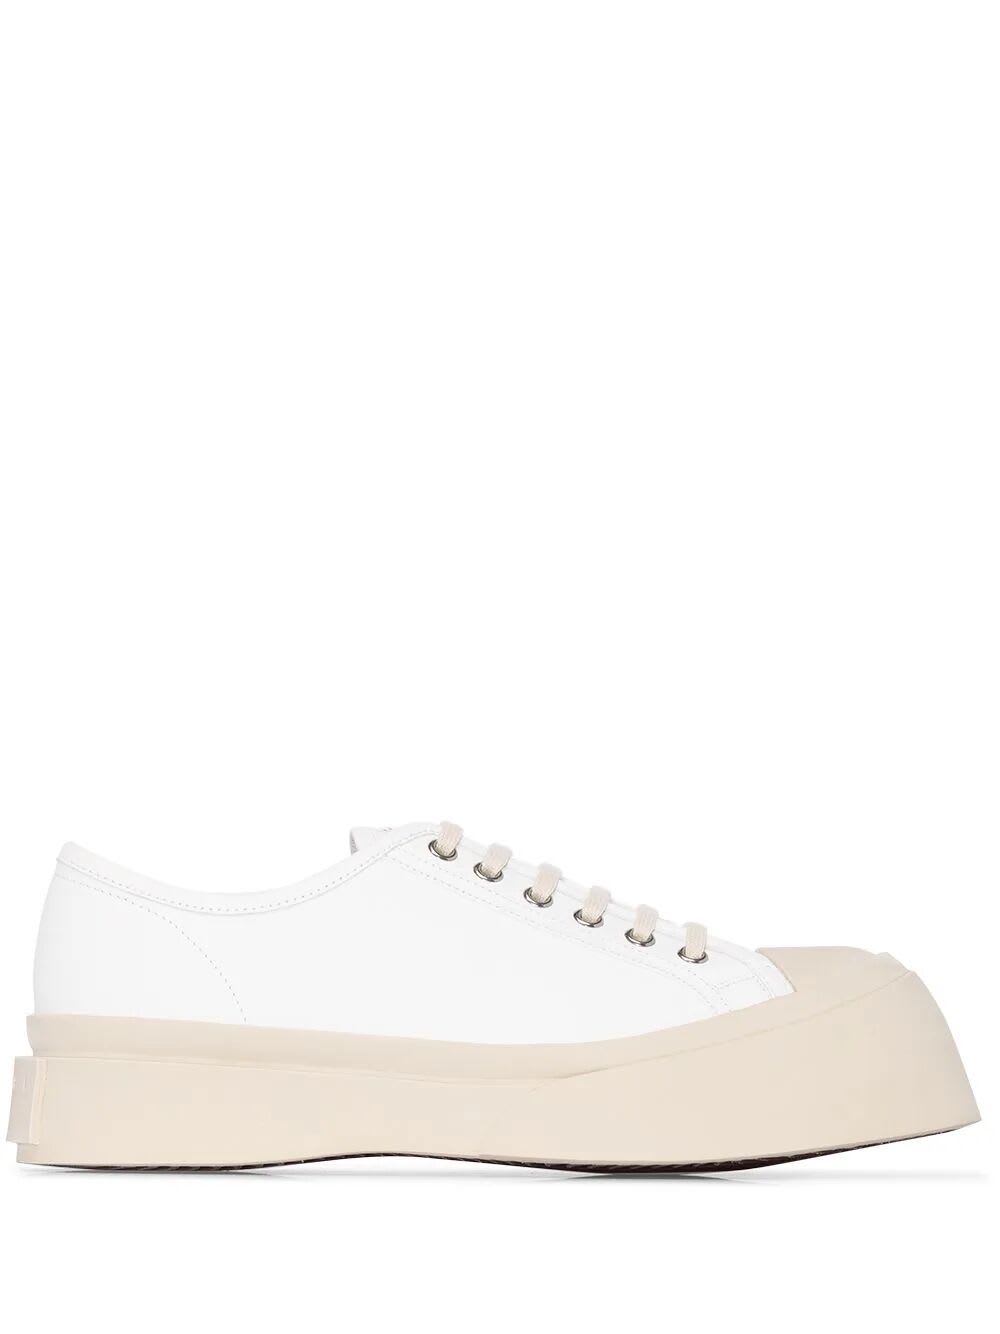 Shop Marni Laced Up Shoes In Lily White